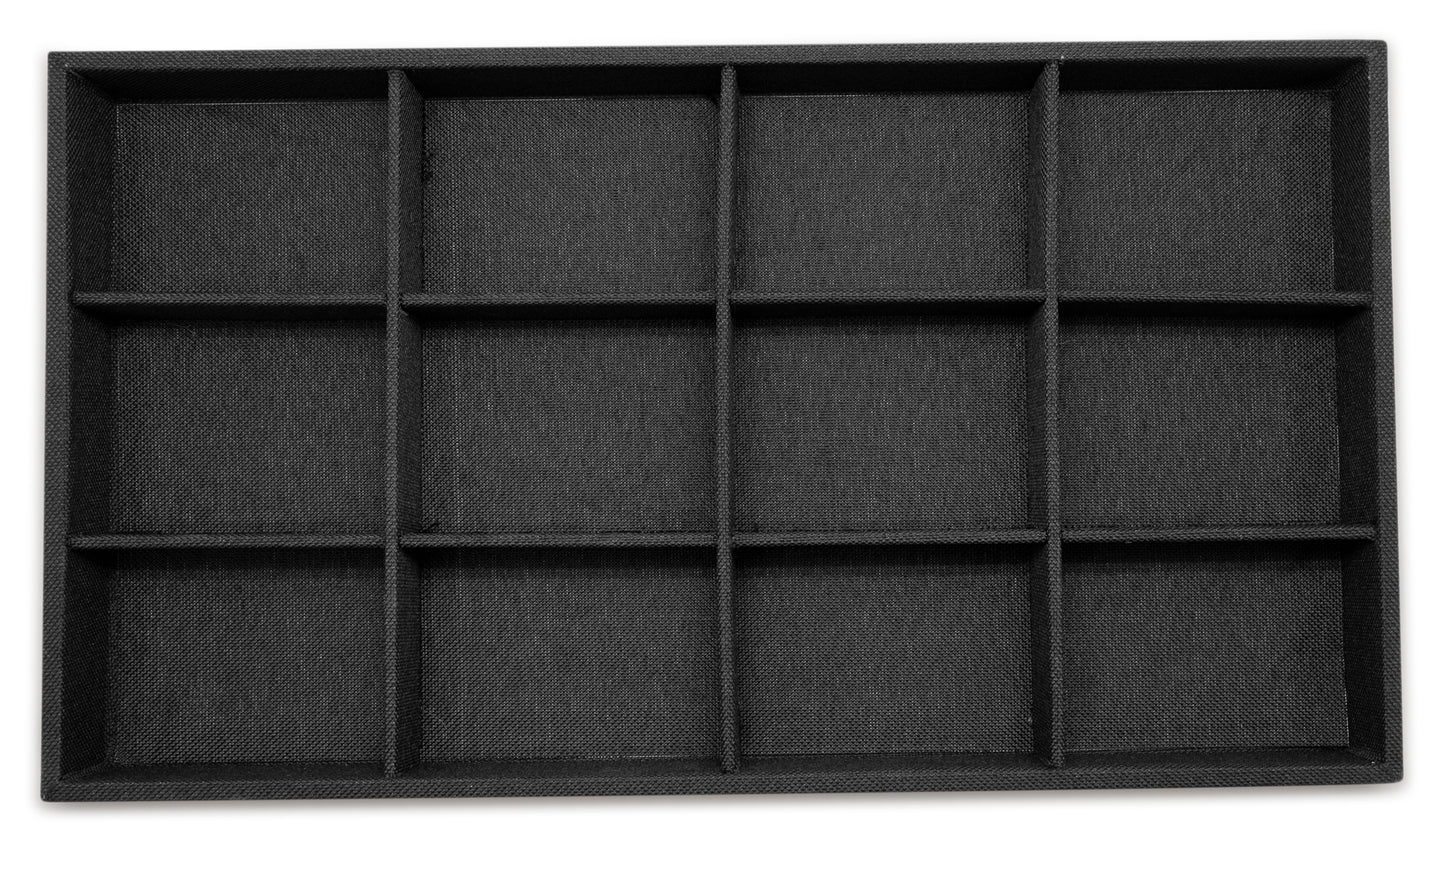 Black Linen 12 Compartment Stackable Jewelry Tray